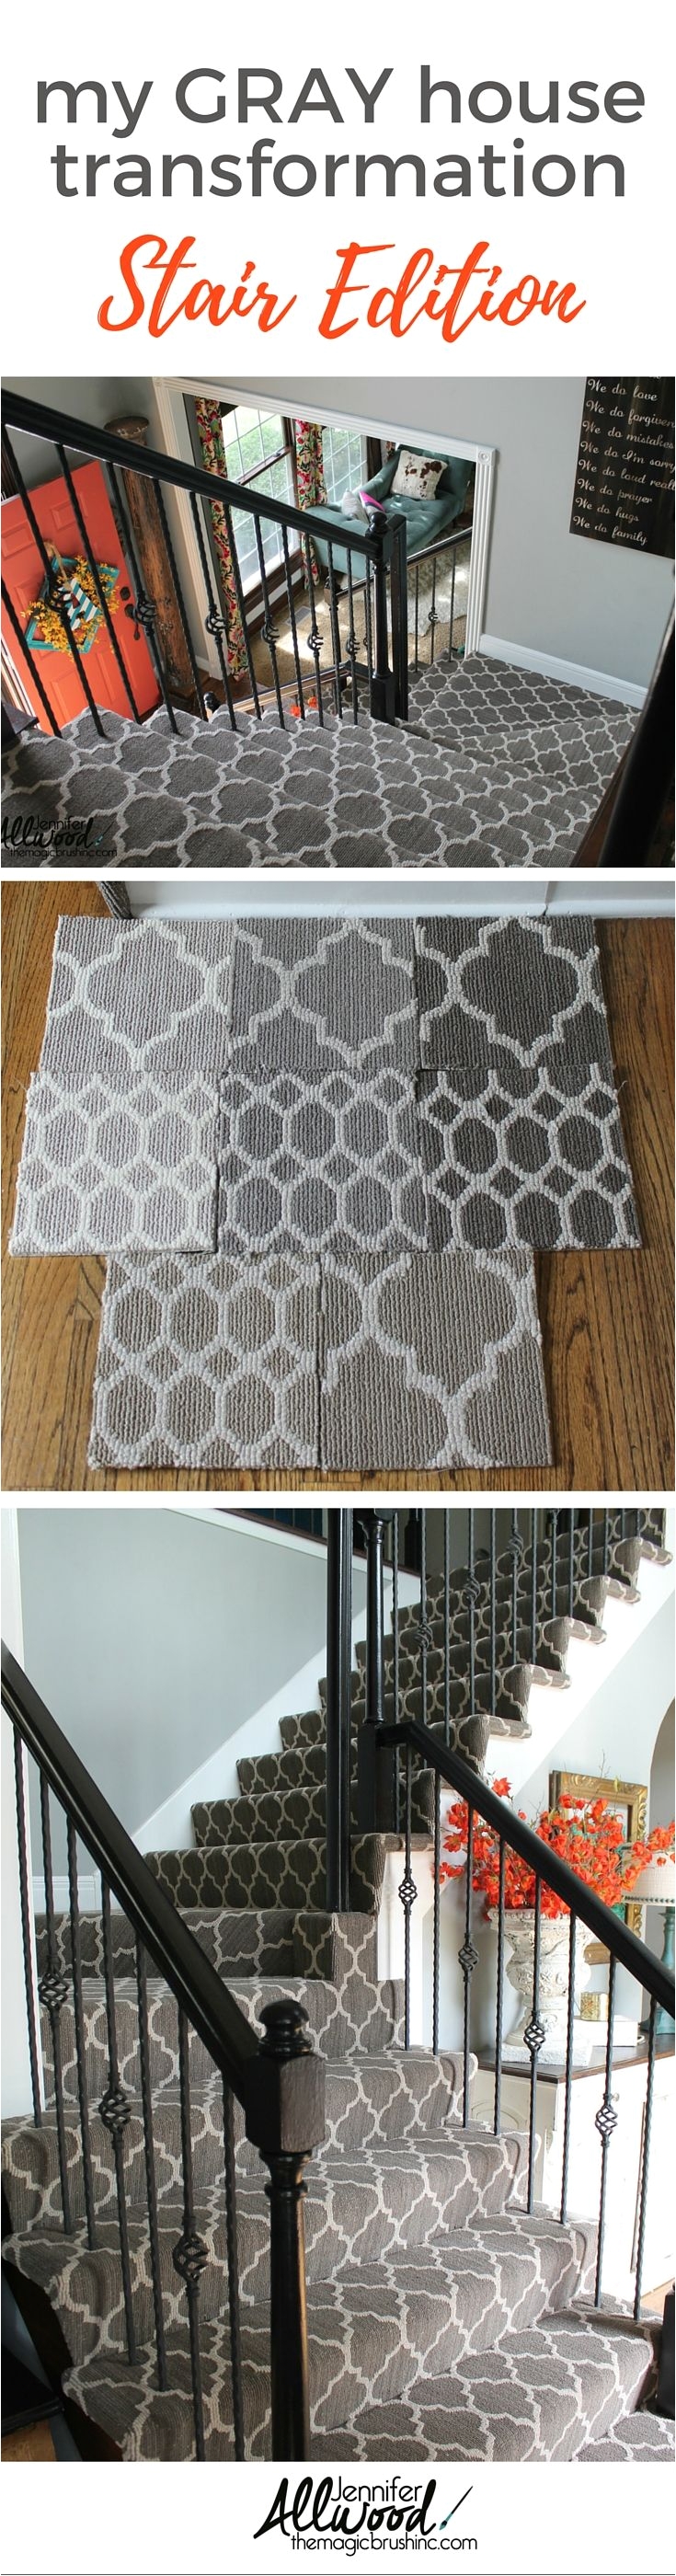 staircase idea here s my gray patterned stair carpet makeover i chose a modern gray arabesque to replace the brown gold carpet more diy home projects